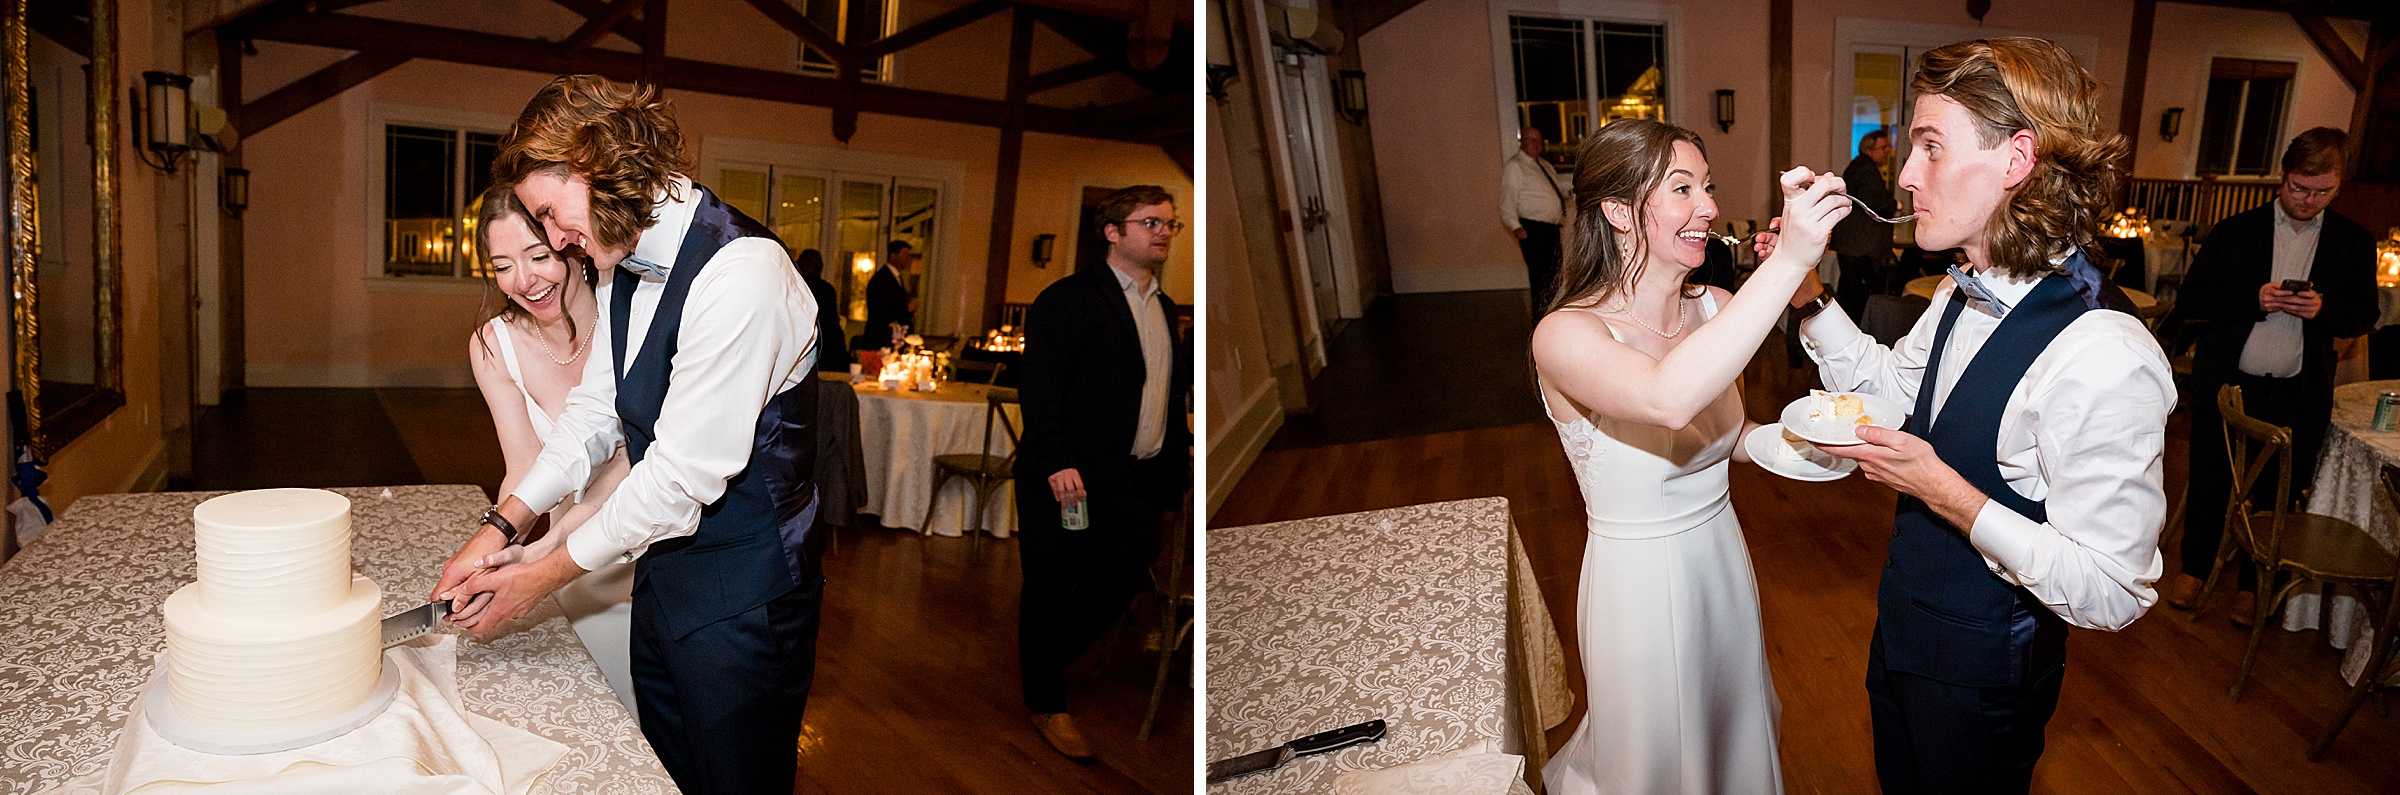 A couple is cutting their wedding cake and feeding each other a piece in a warmly lit room.